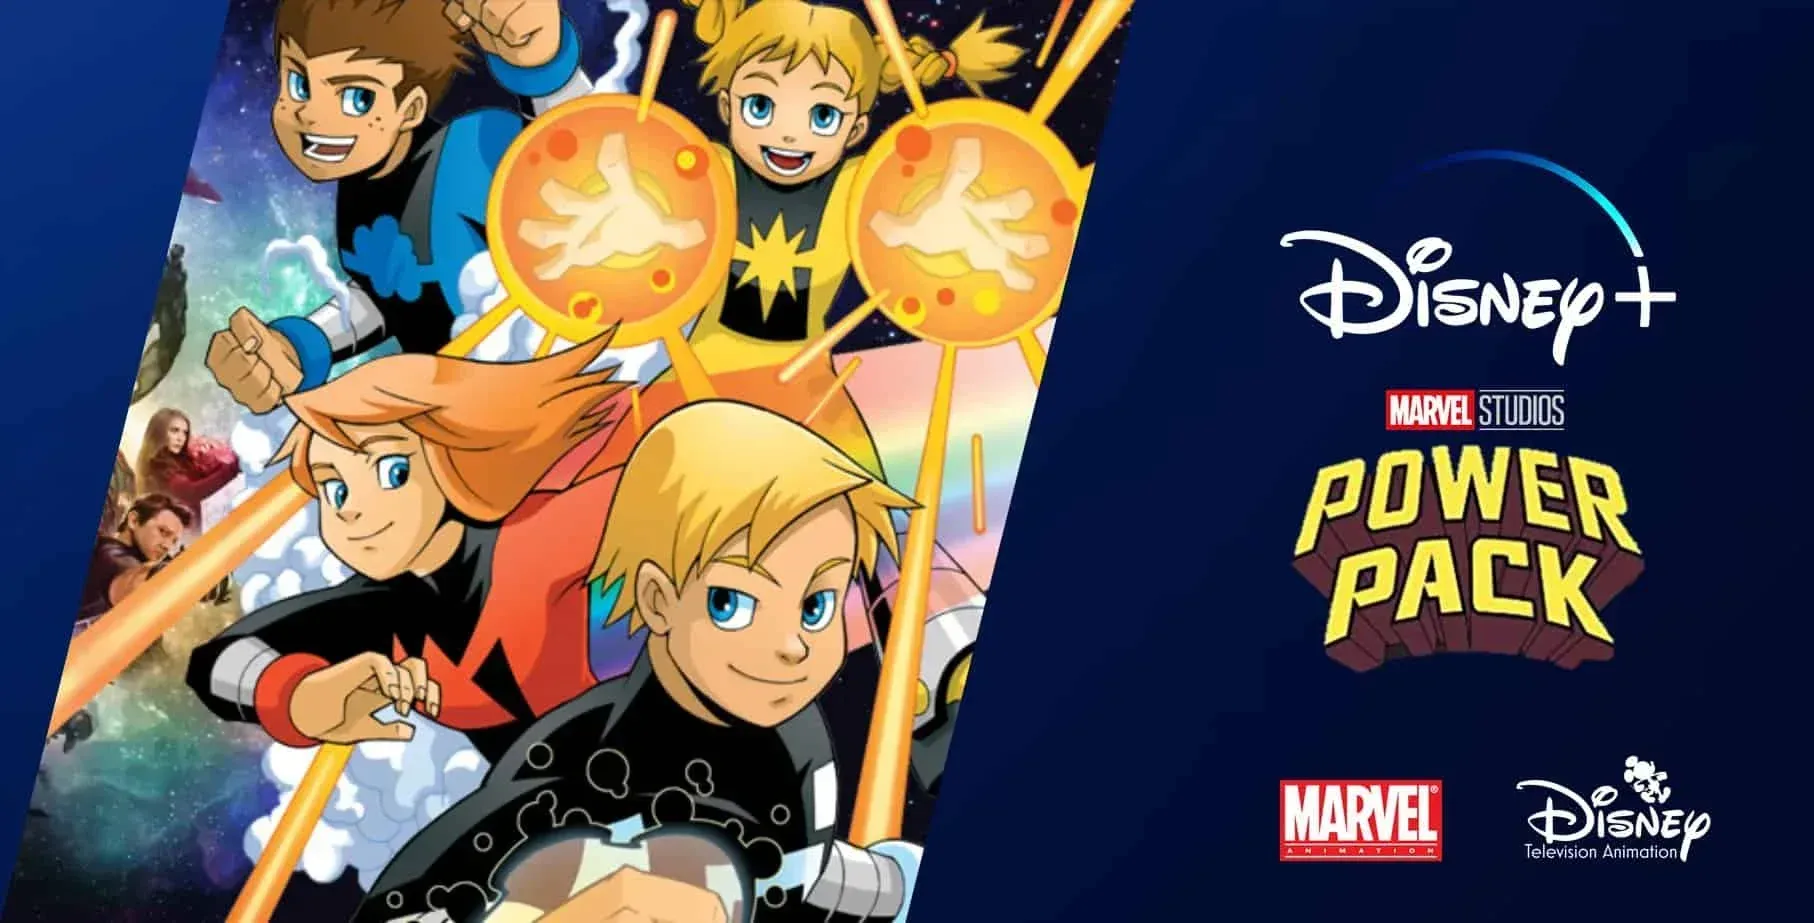 What Is the Power Pack’s Comic Book Legacy?